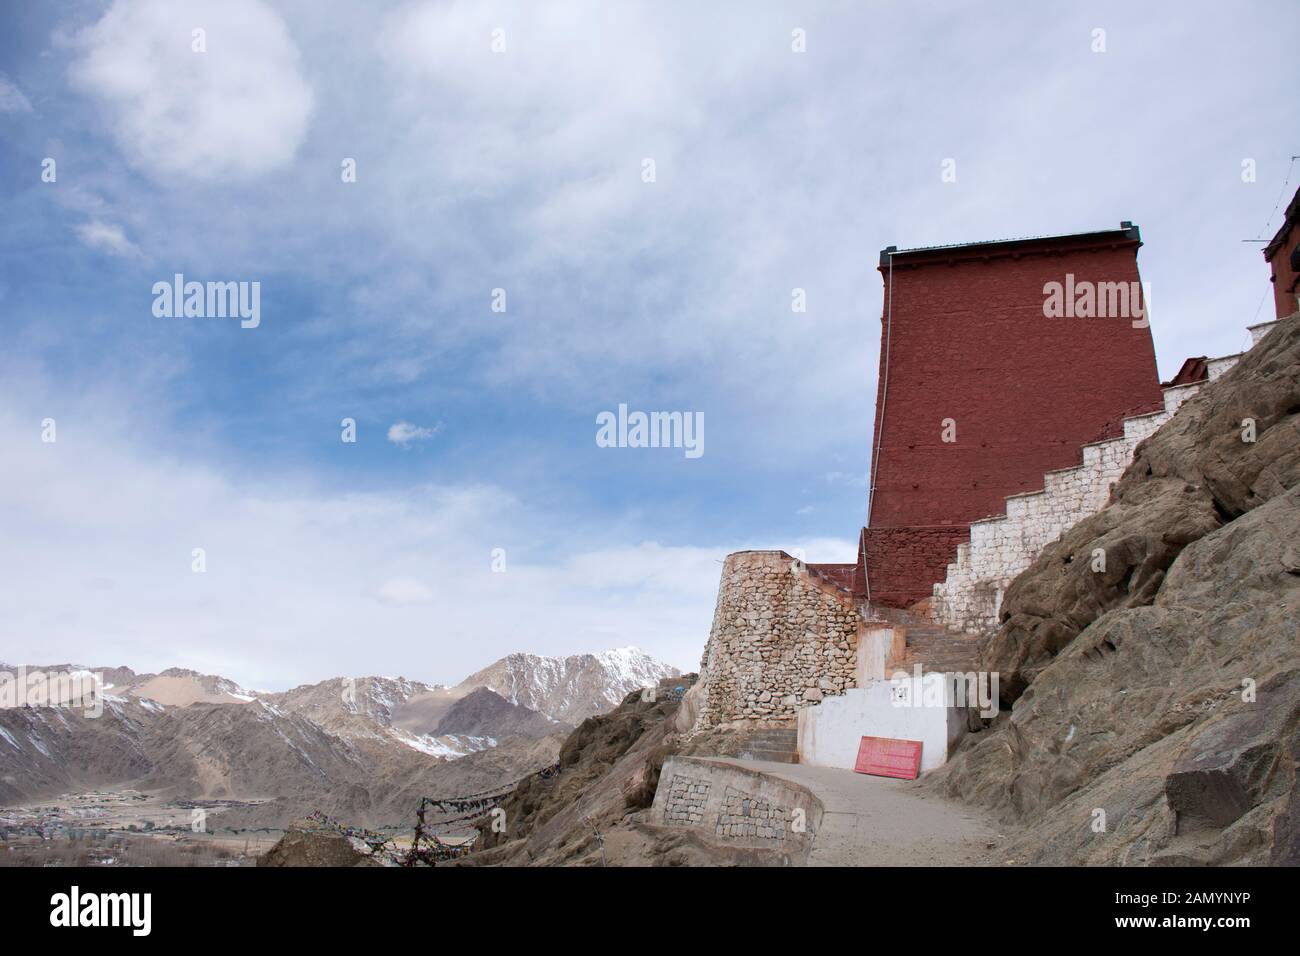 Inside interior and architect of Thiksey monastery and Namgyal Tsemo Gompa at Leh Ladakh Village while winter season in Jammu and Kashmir, India Stock Photo